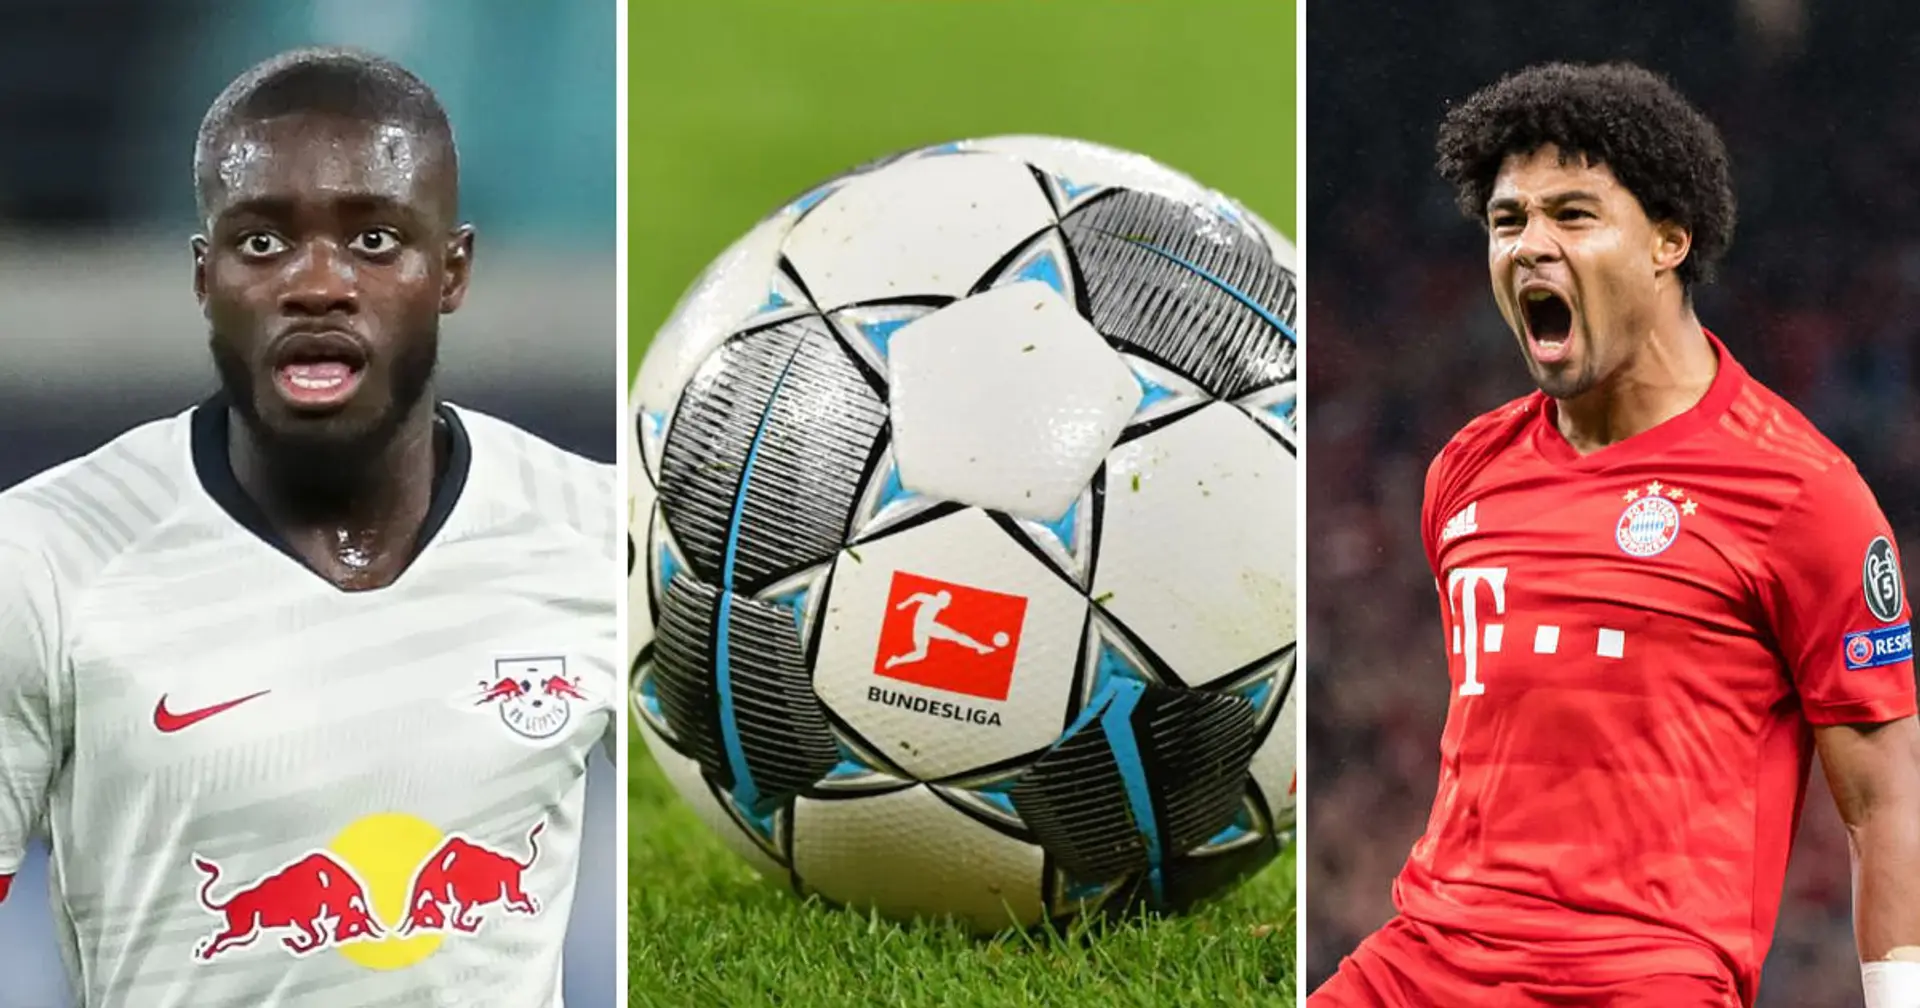 🇩🇪 Bundesliga resumes this weekend: loanees, former Gunners and Arsenal targets to watch